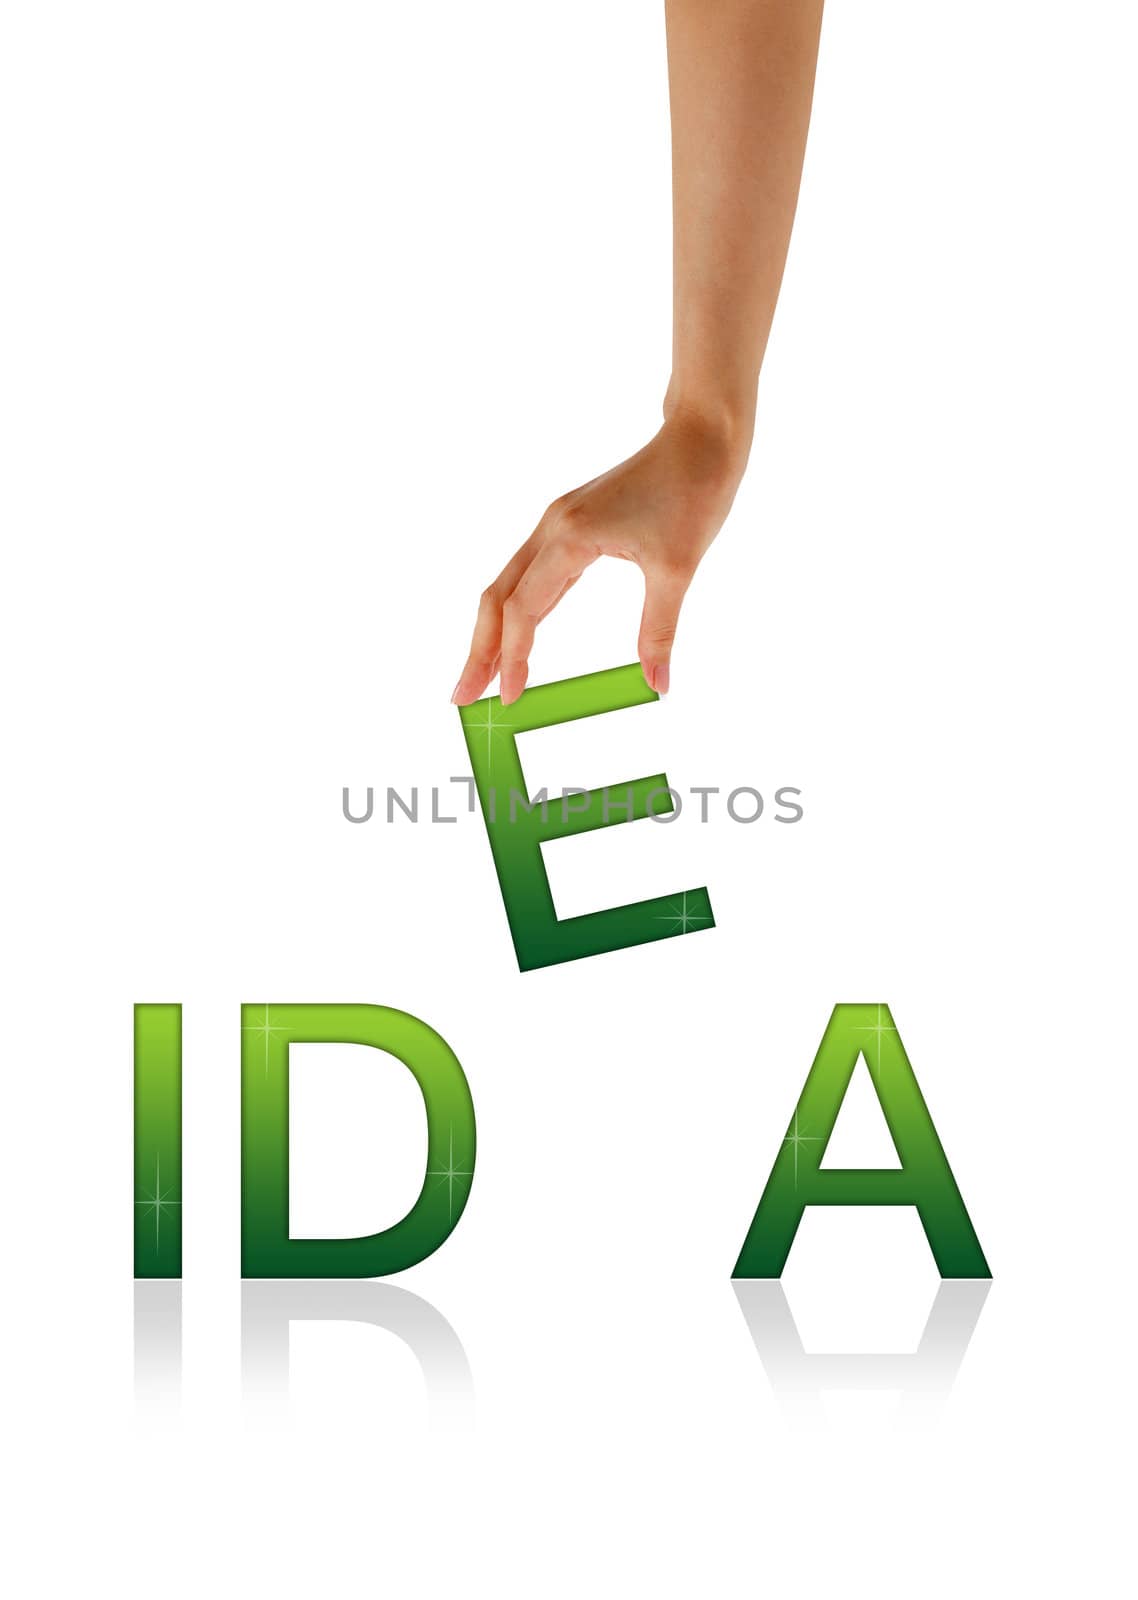 High resolution graphic of a hand holding the letter E from the word Idea.